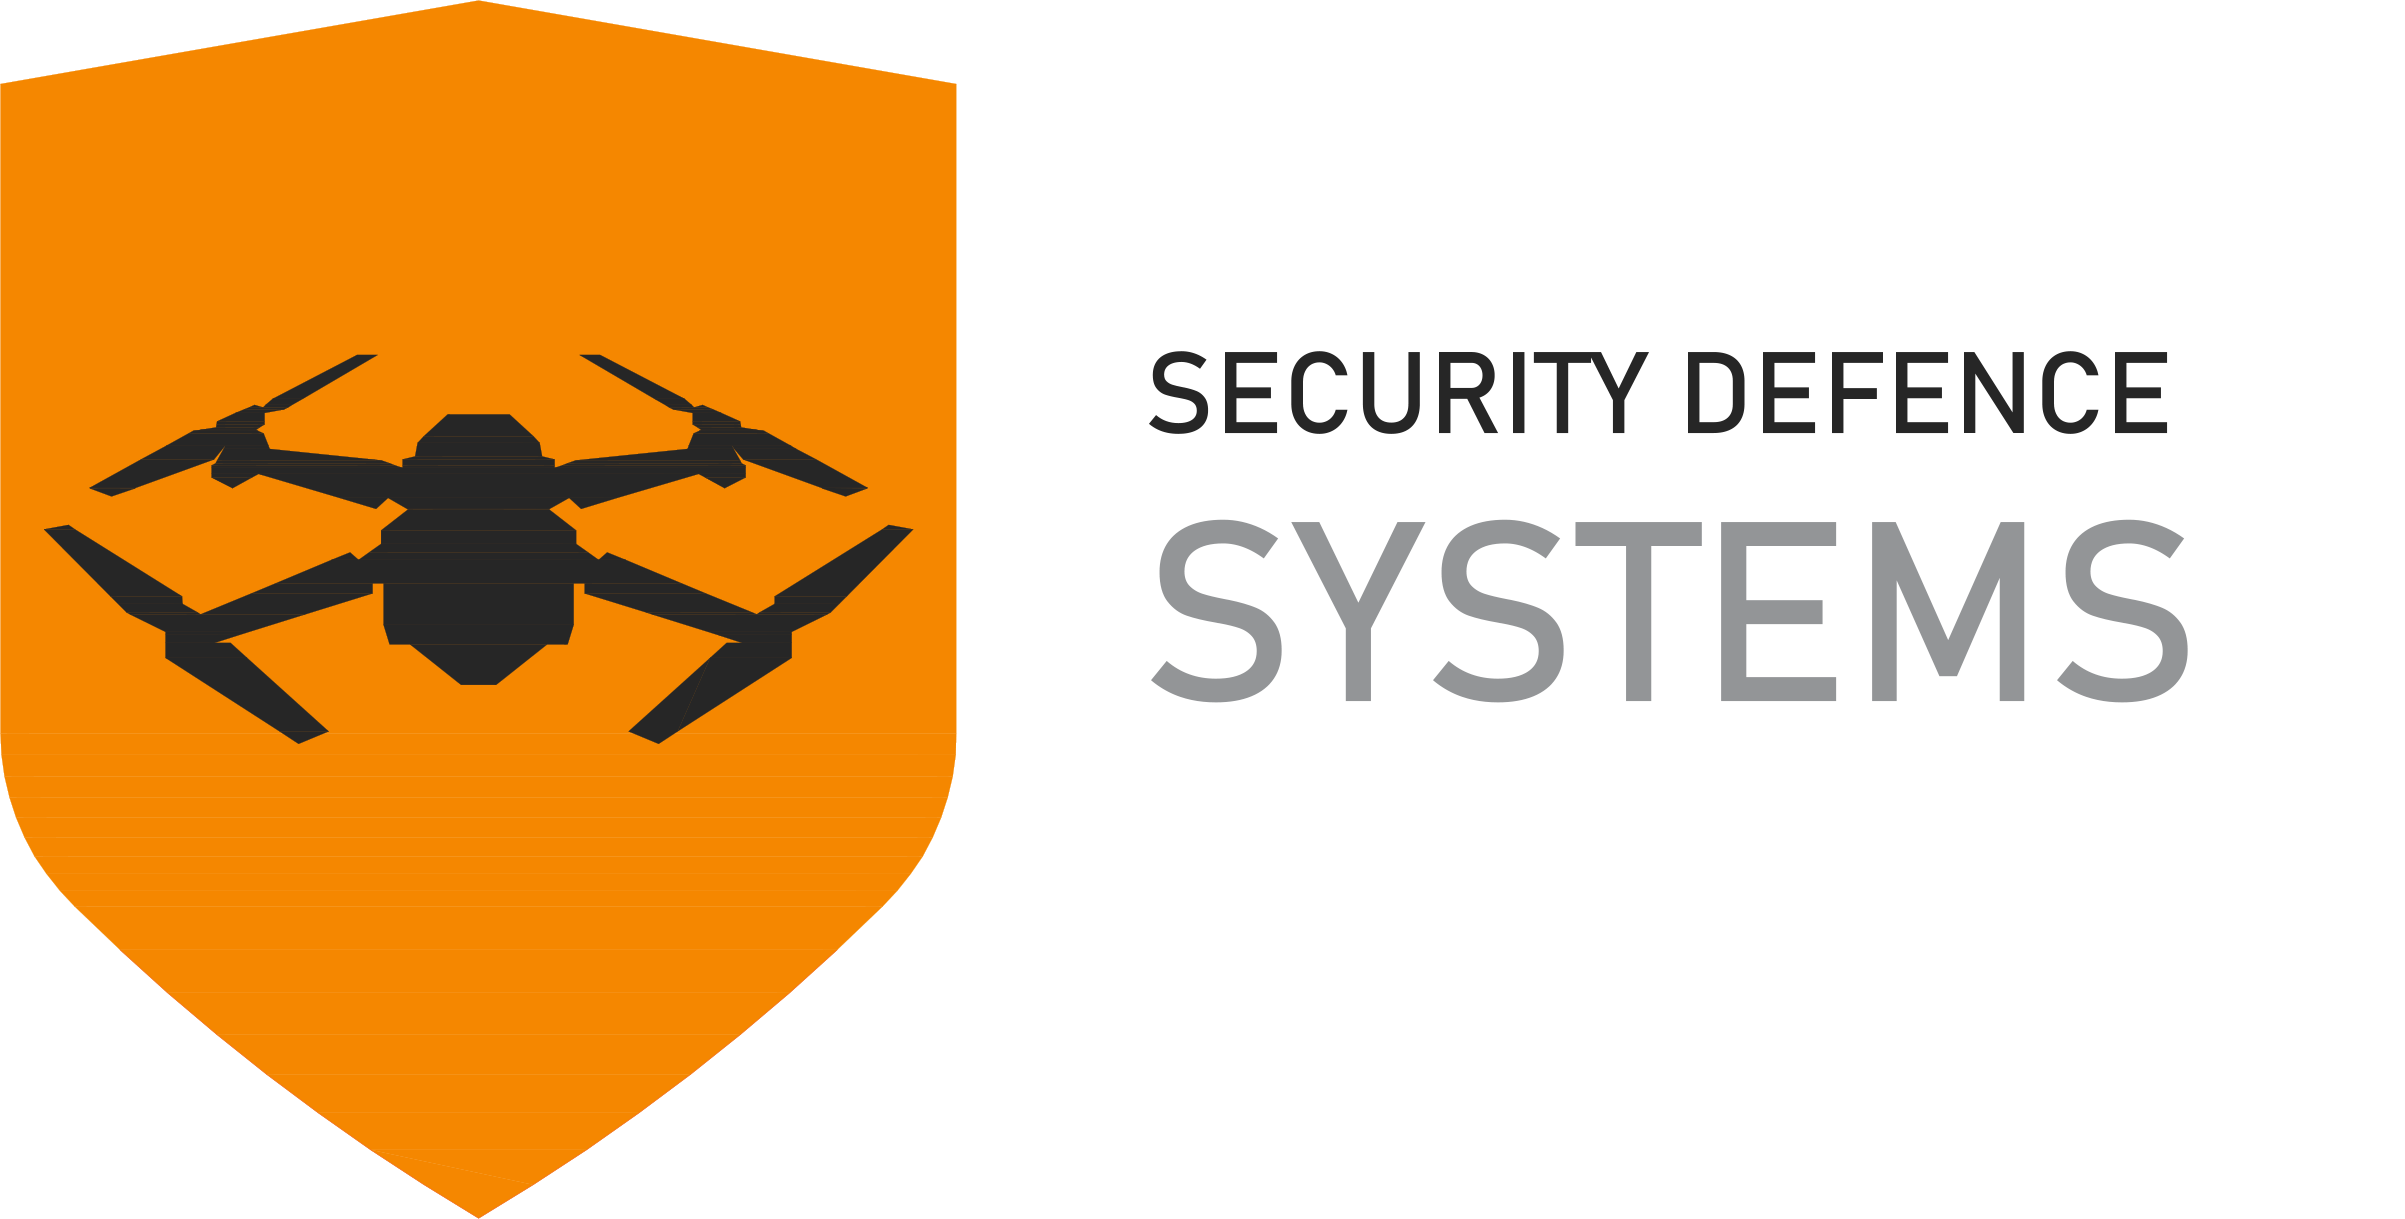 Security Defence Systems